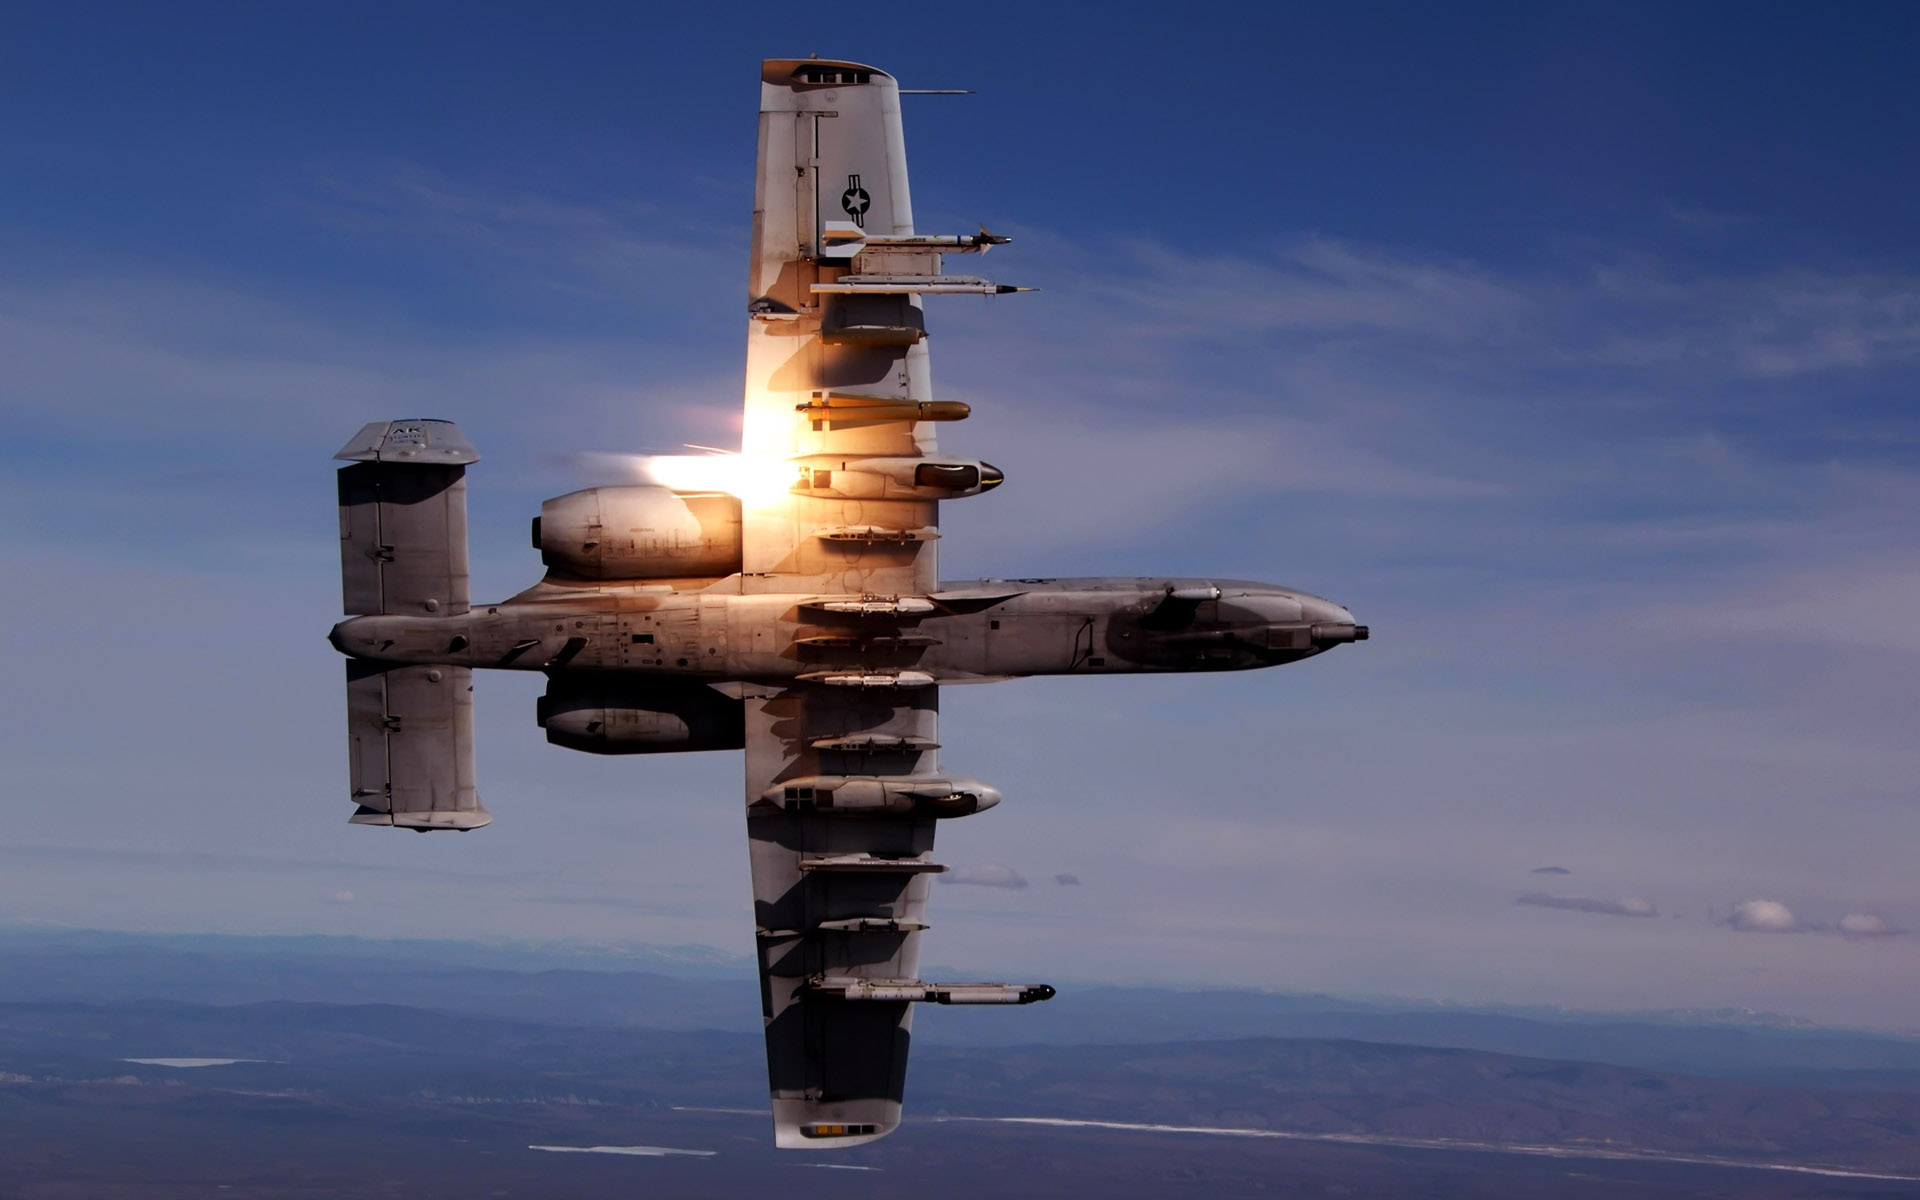 A 10 Thunderbolt II During Live Fire Training75200910 - A 10 Thunderbolt II During Live Fire Training - Training, Thunderbolt, Military, Live, Fire, During